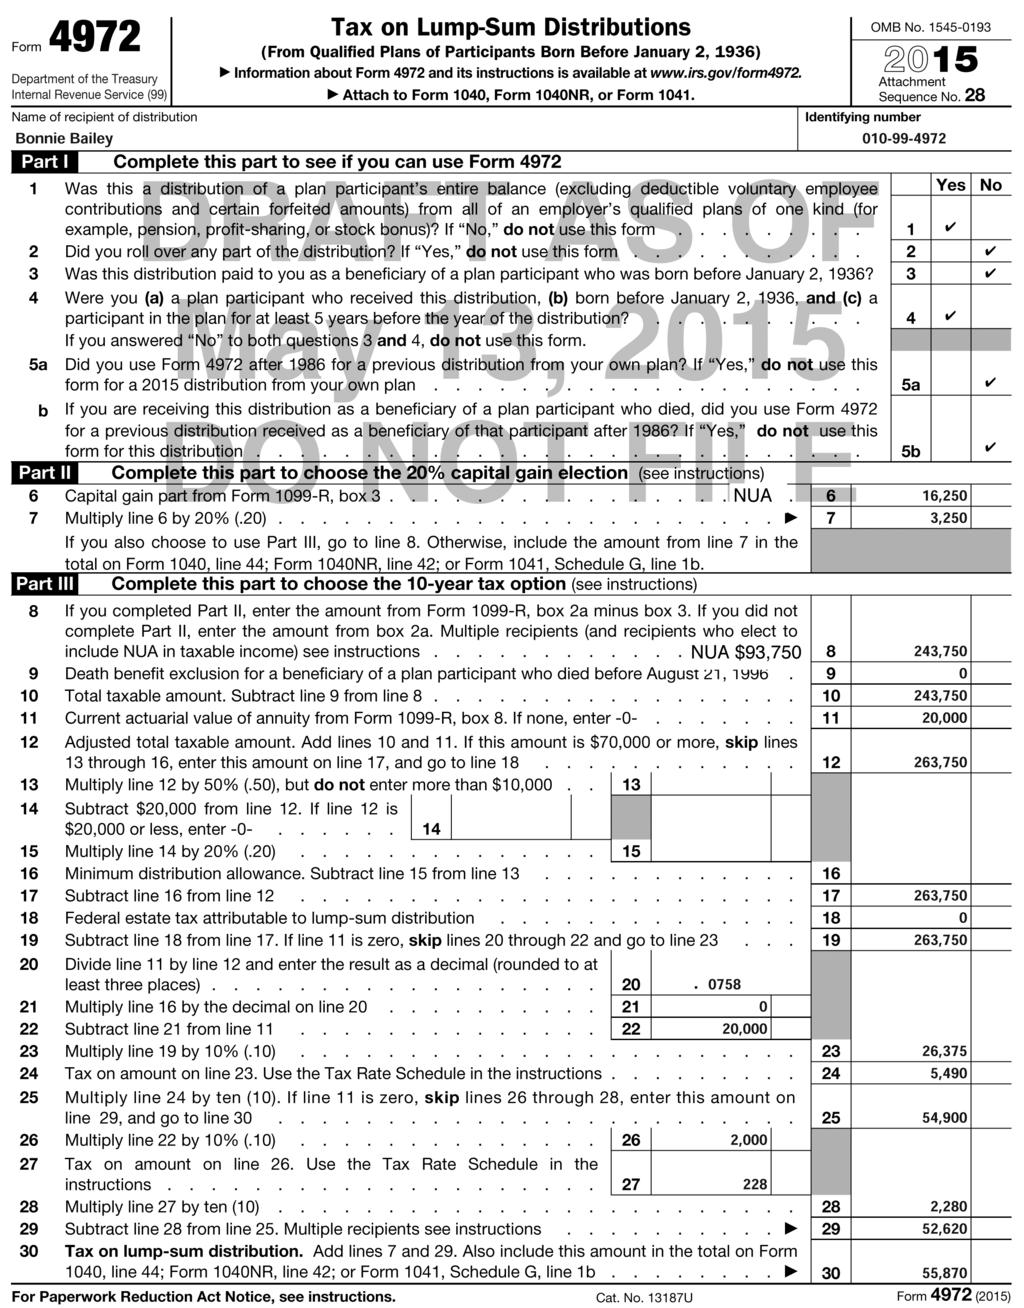 Example 3.21 10-Year Option Using the facts in Example 3.20, Bonnie Bailey s $55,870 tax on her $250,000 lump sum distribution is shown on line 30 of the Form 4972 in FIGURE 3.